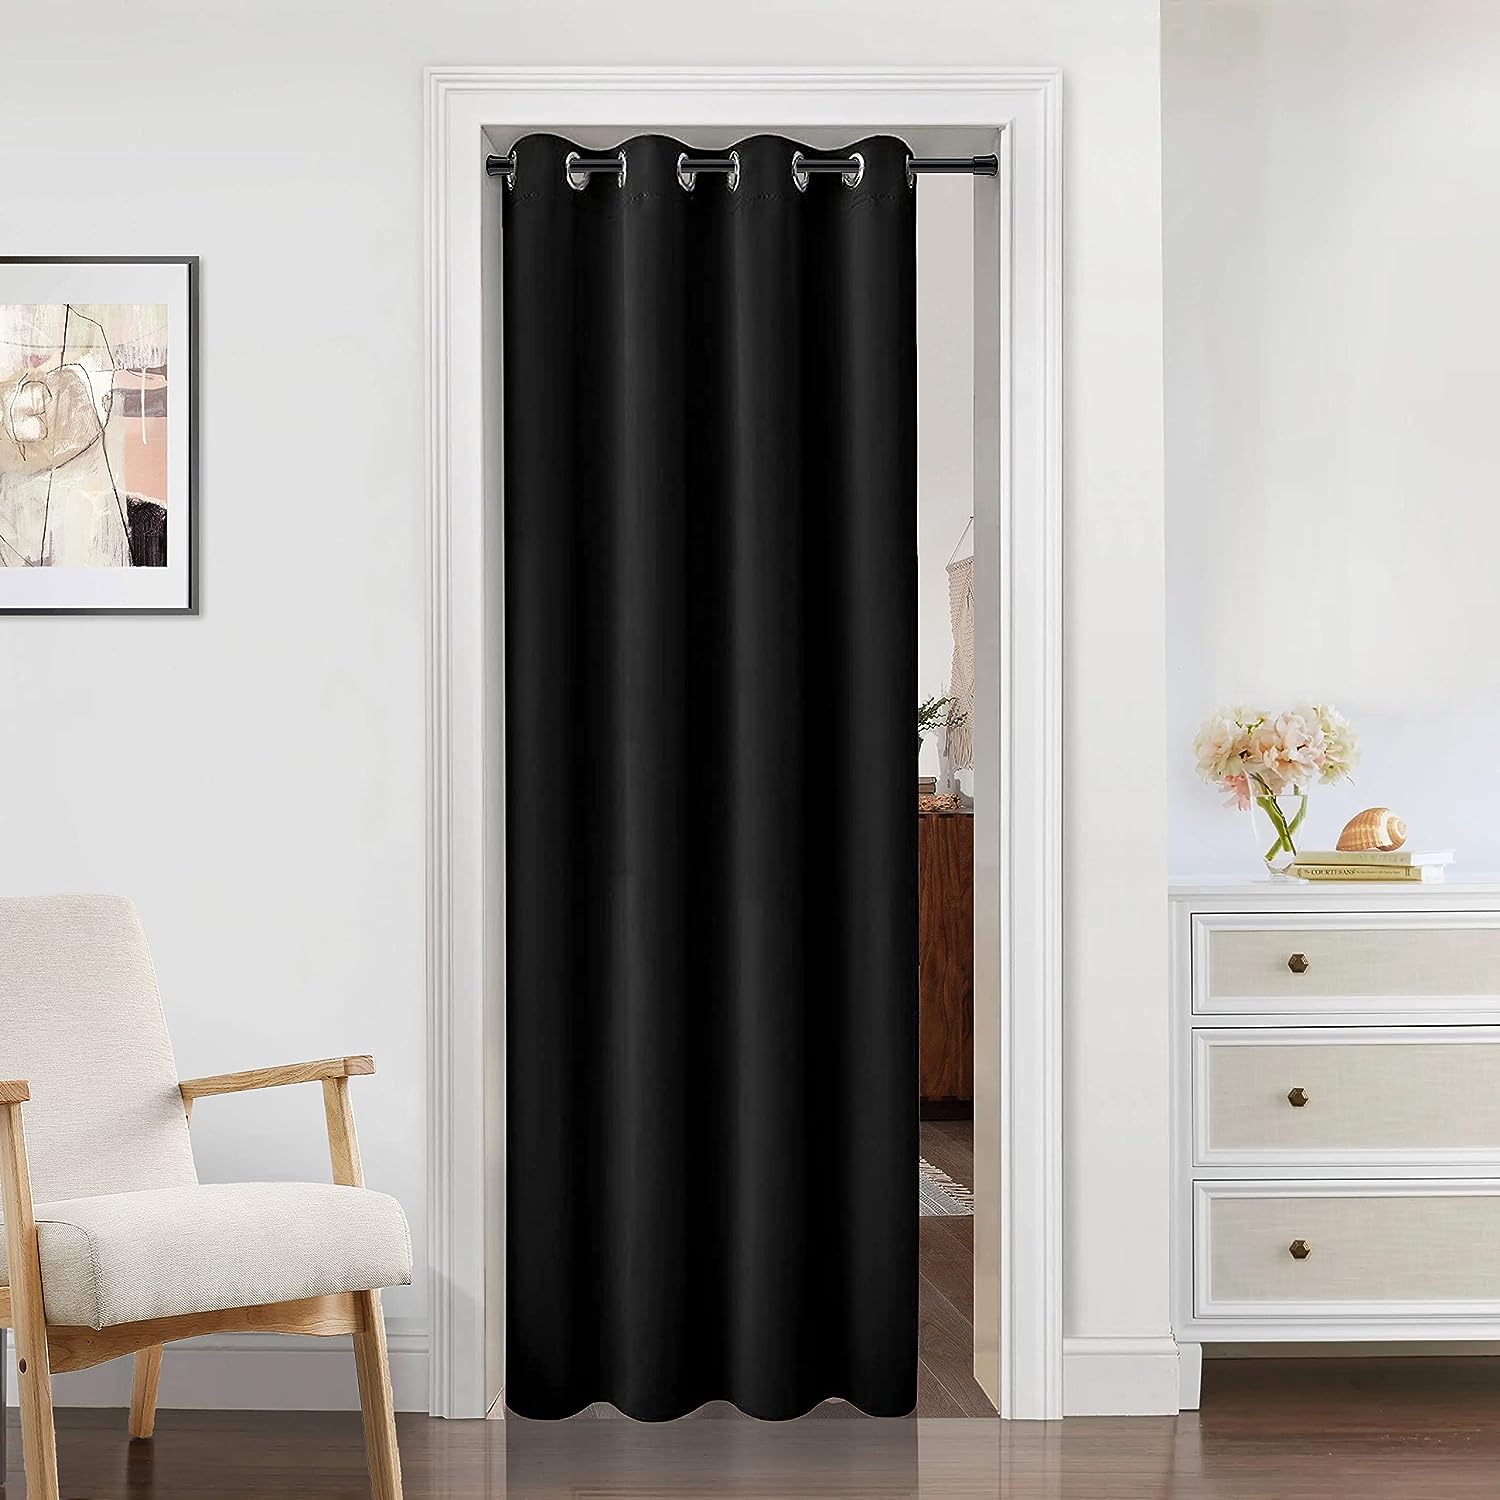 Privacy Heat Blocking Blackout Thermal Insulated Door [...]